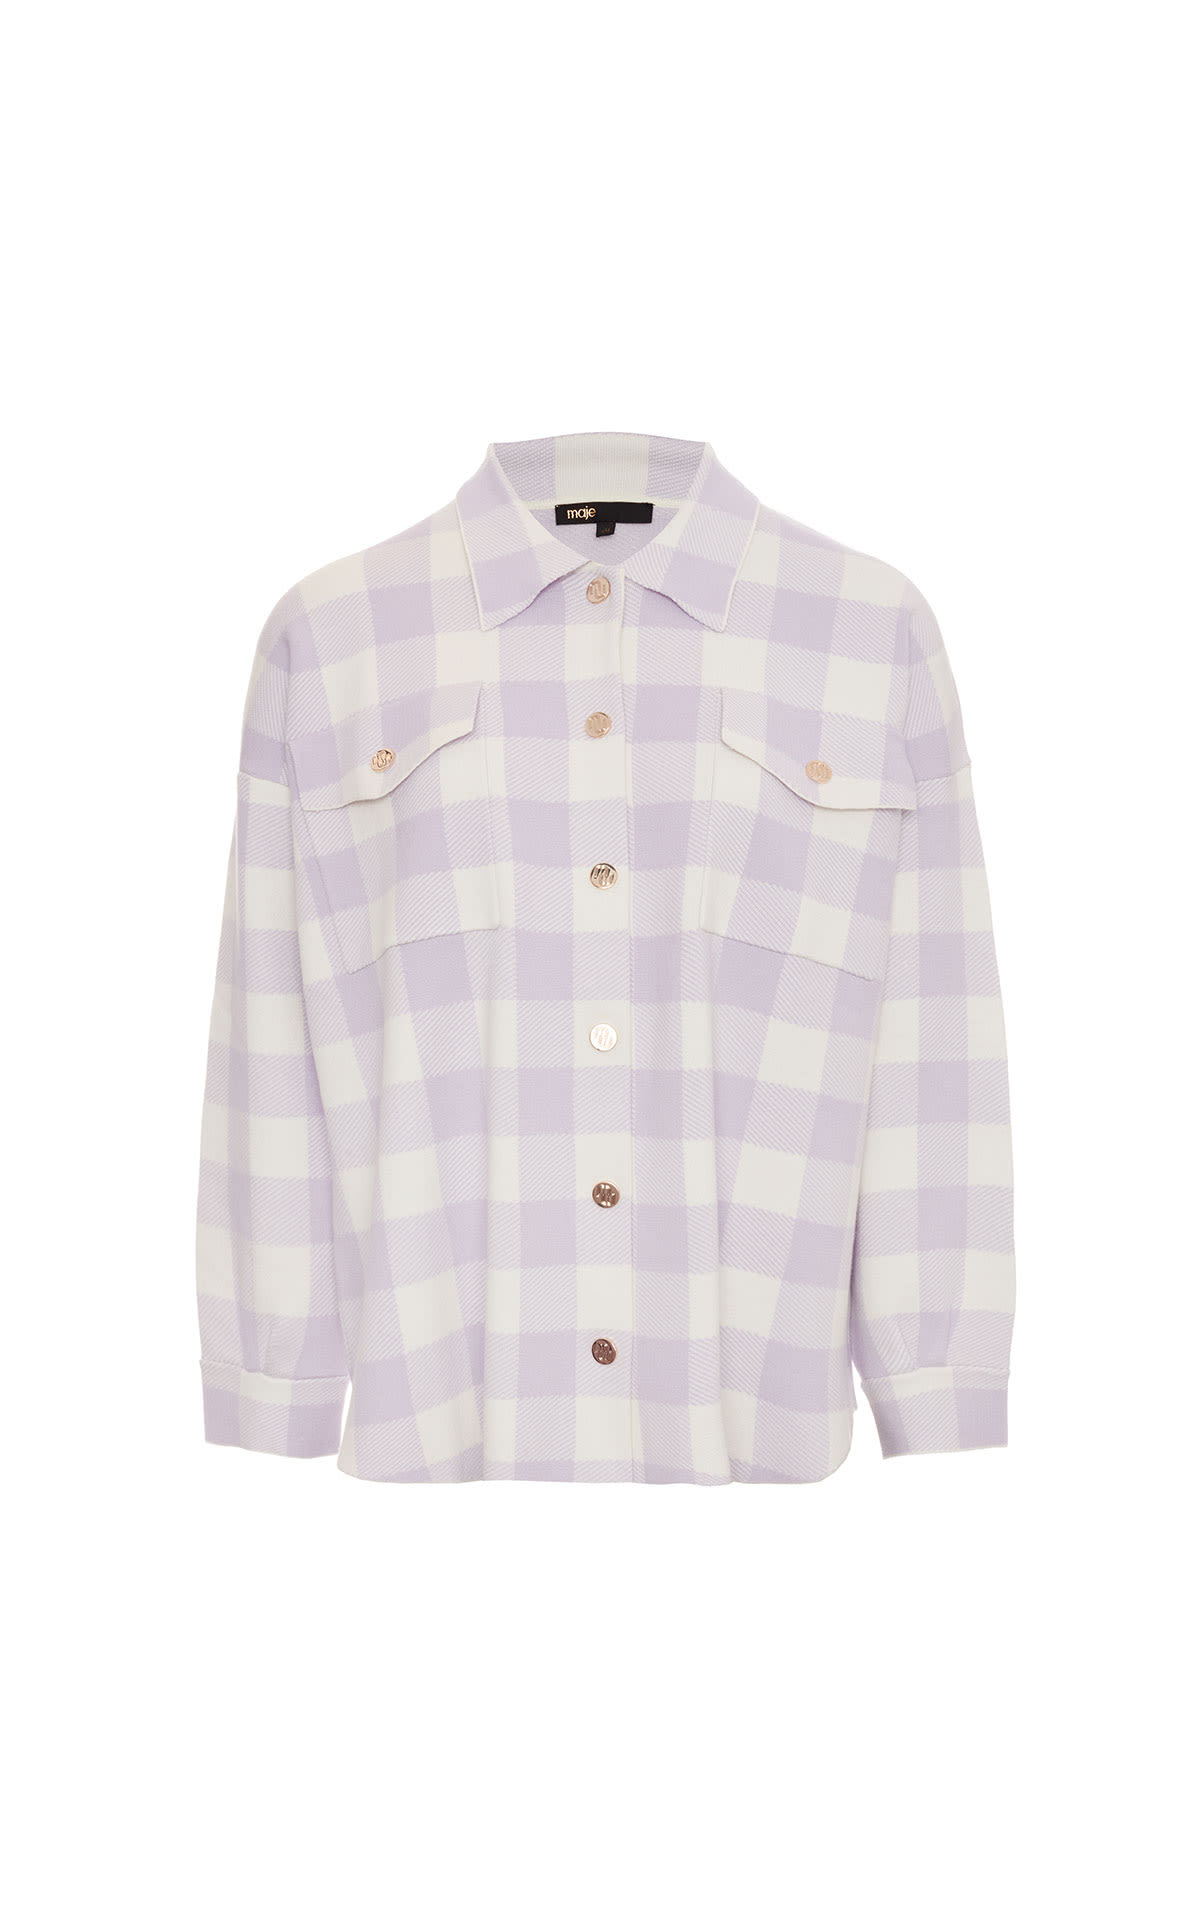 Maje Pastel checked cardigan from Bicester Village